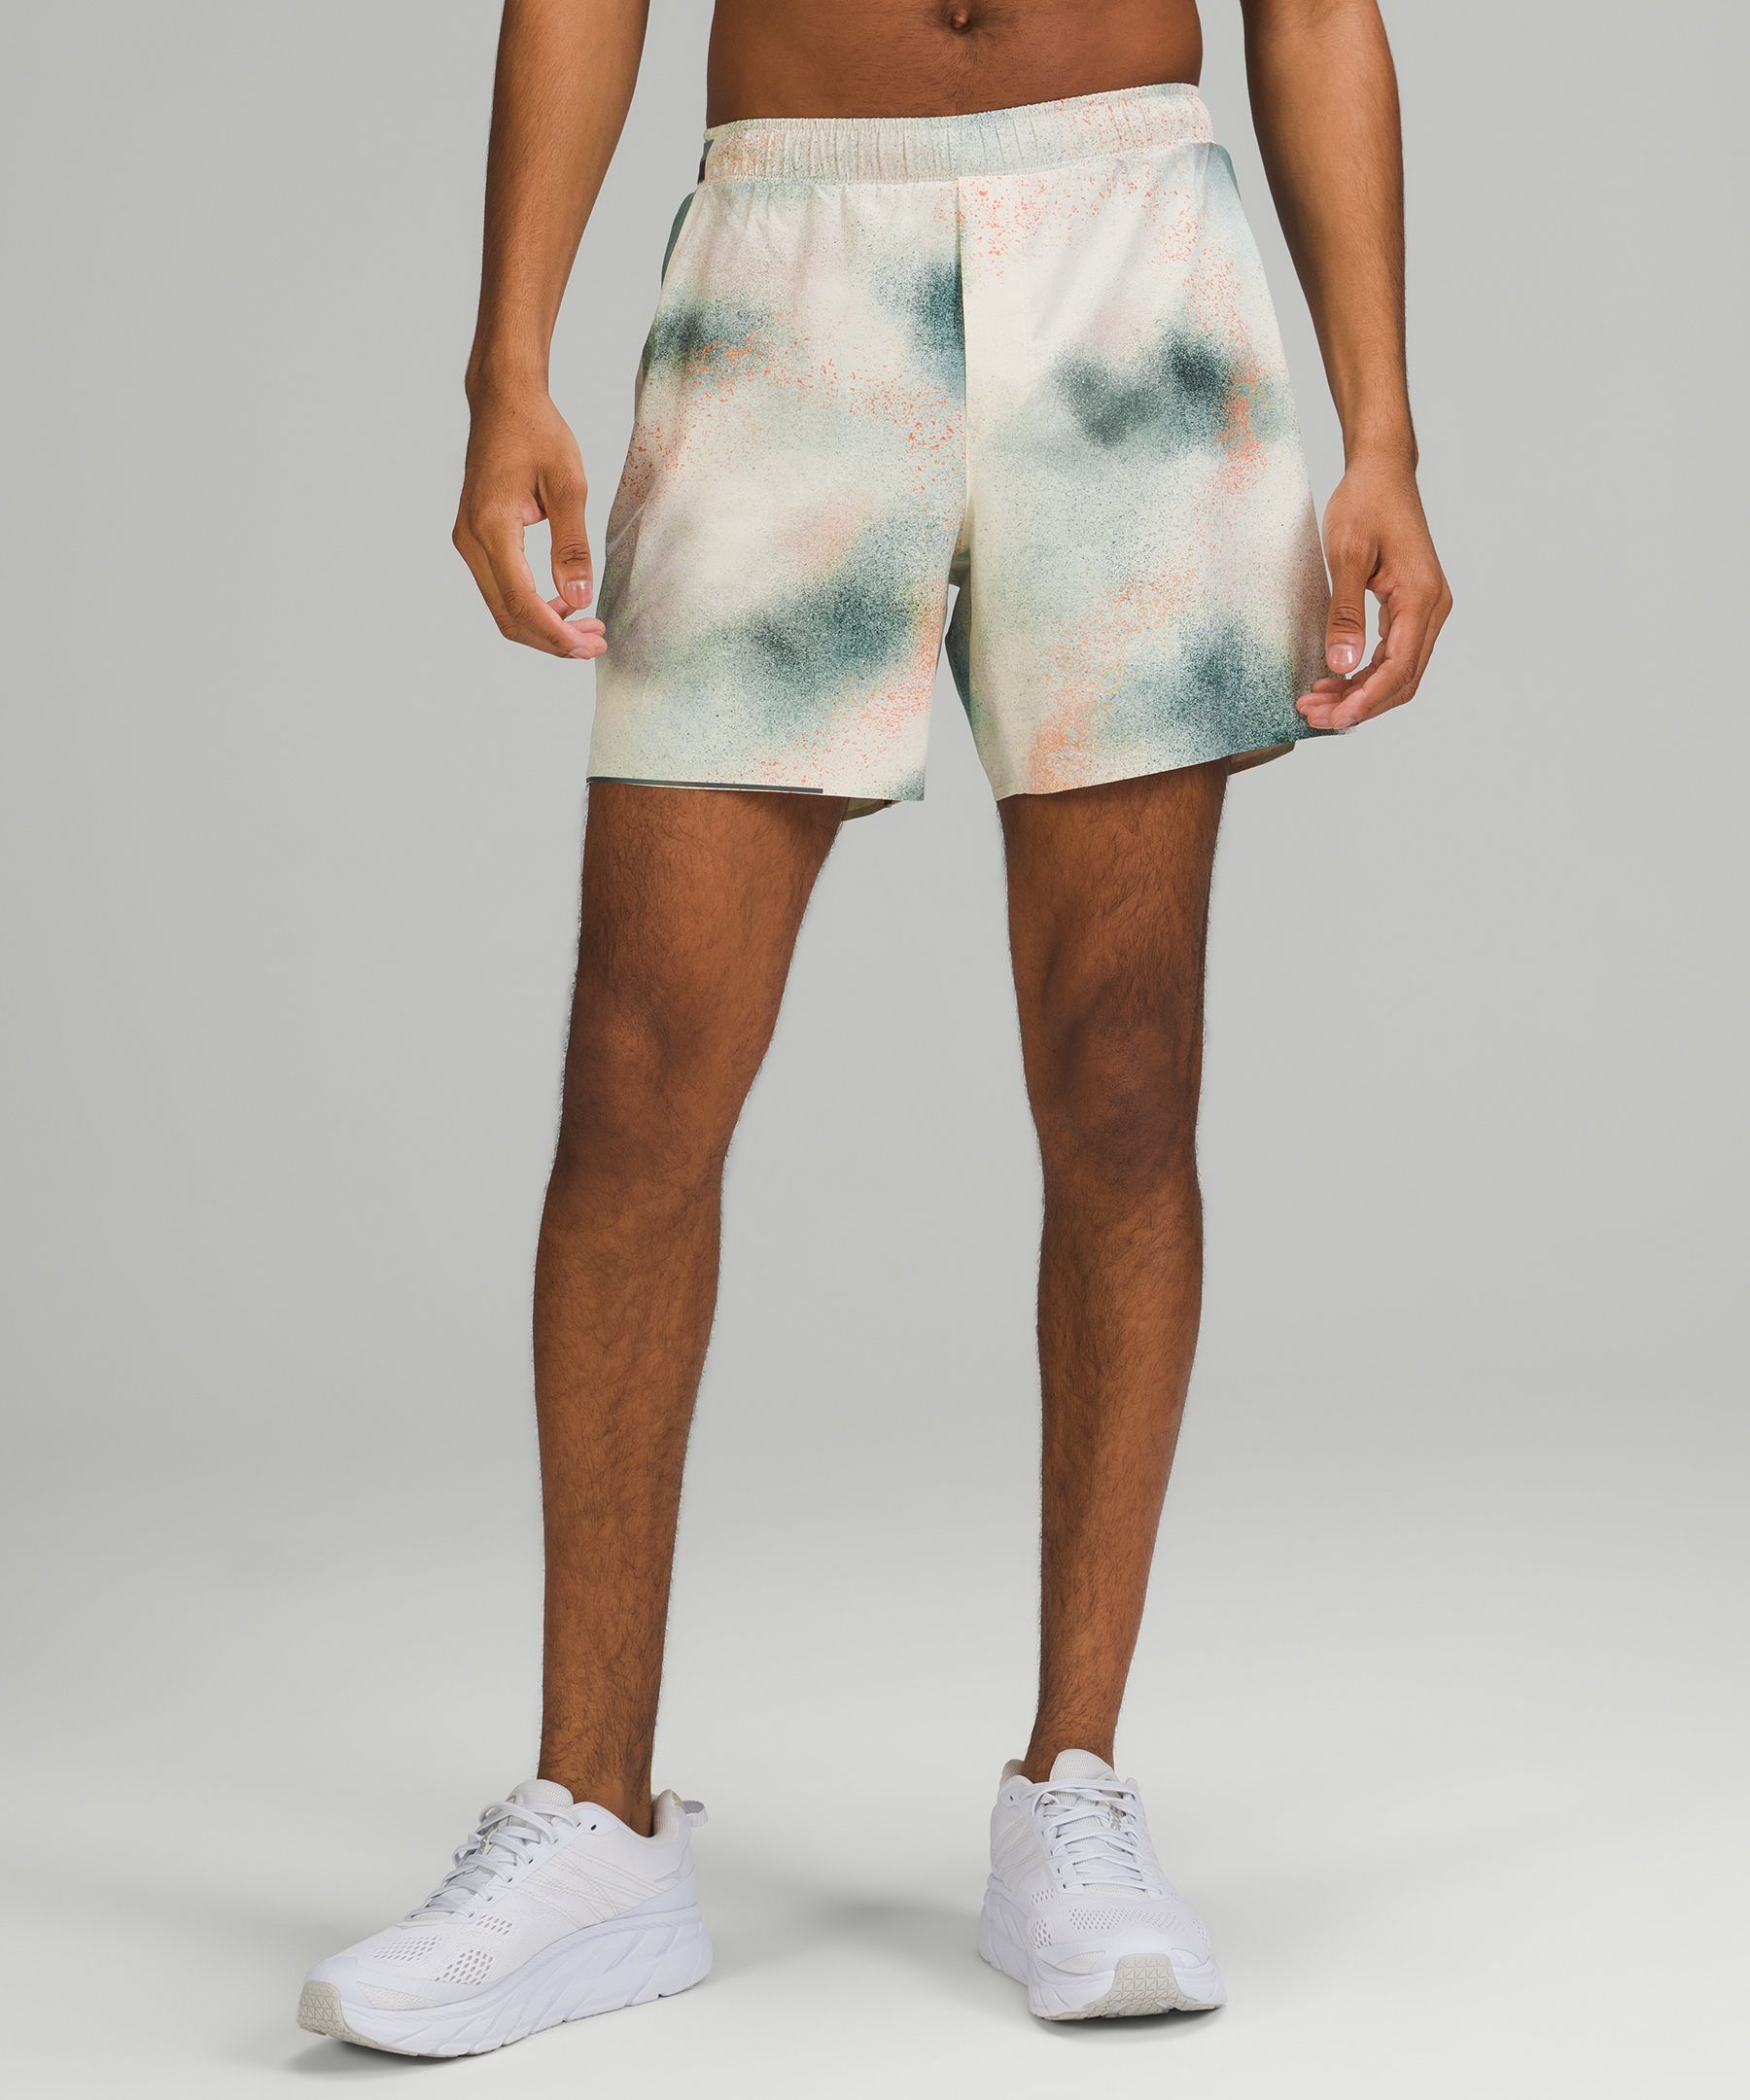 Lululemon Surge Lined Shorts 6" In Spray Camo Silver Blue